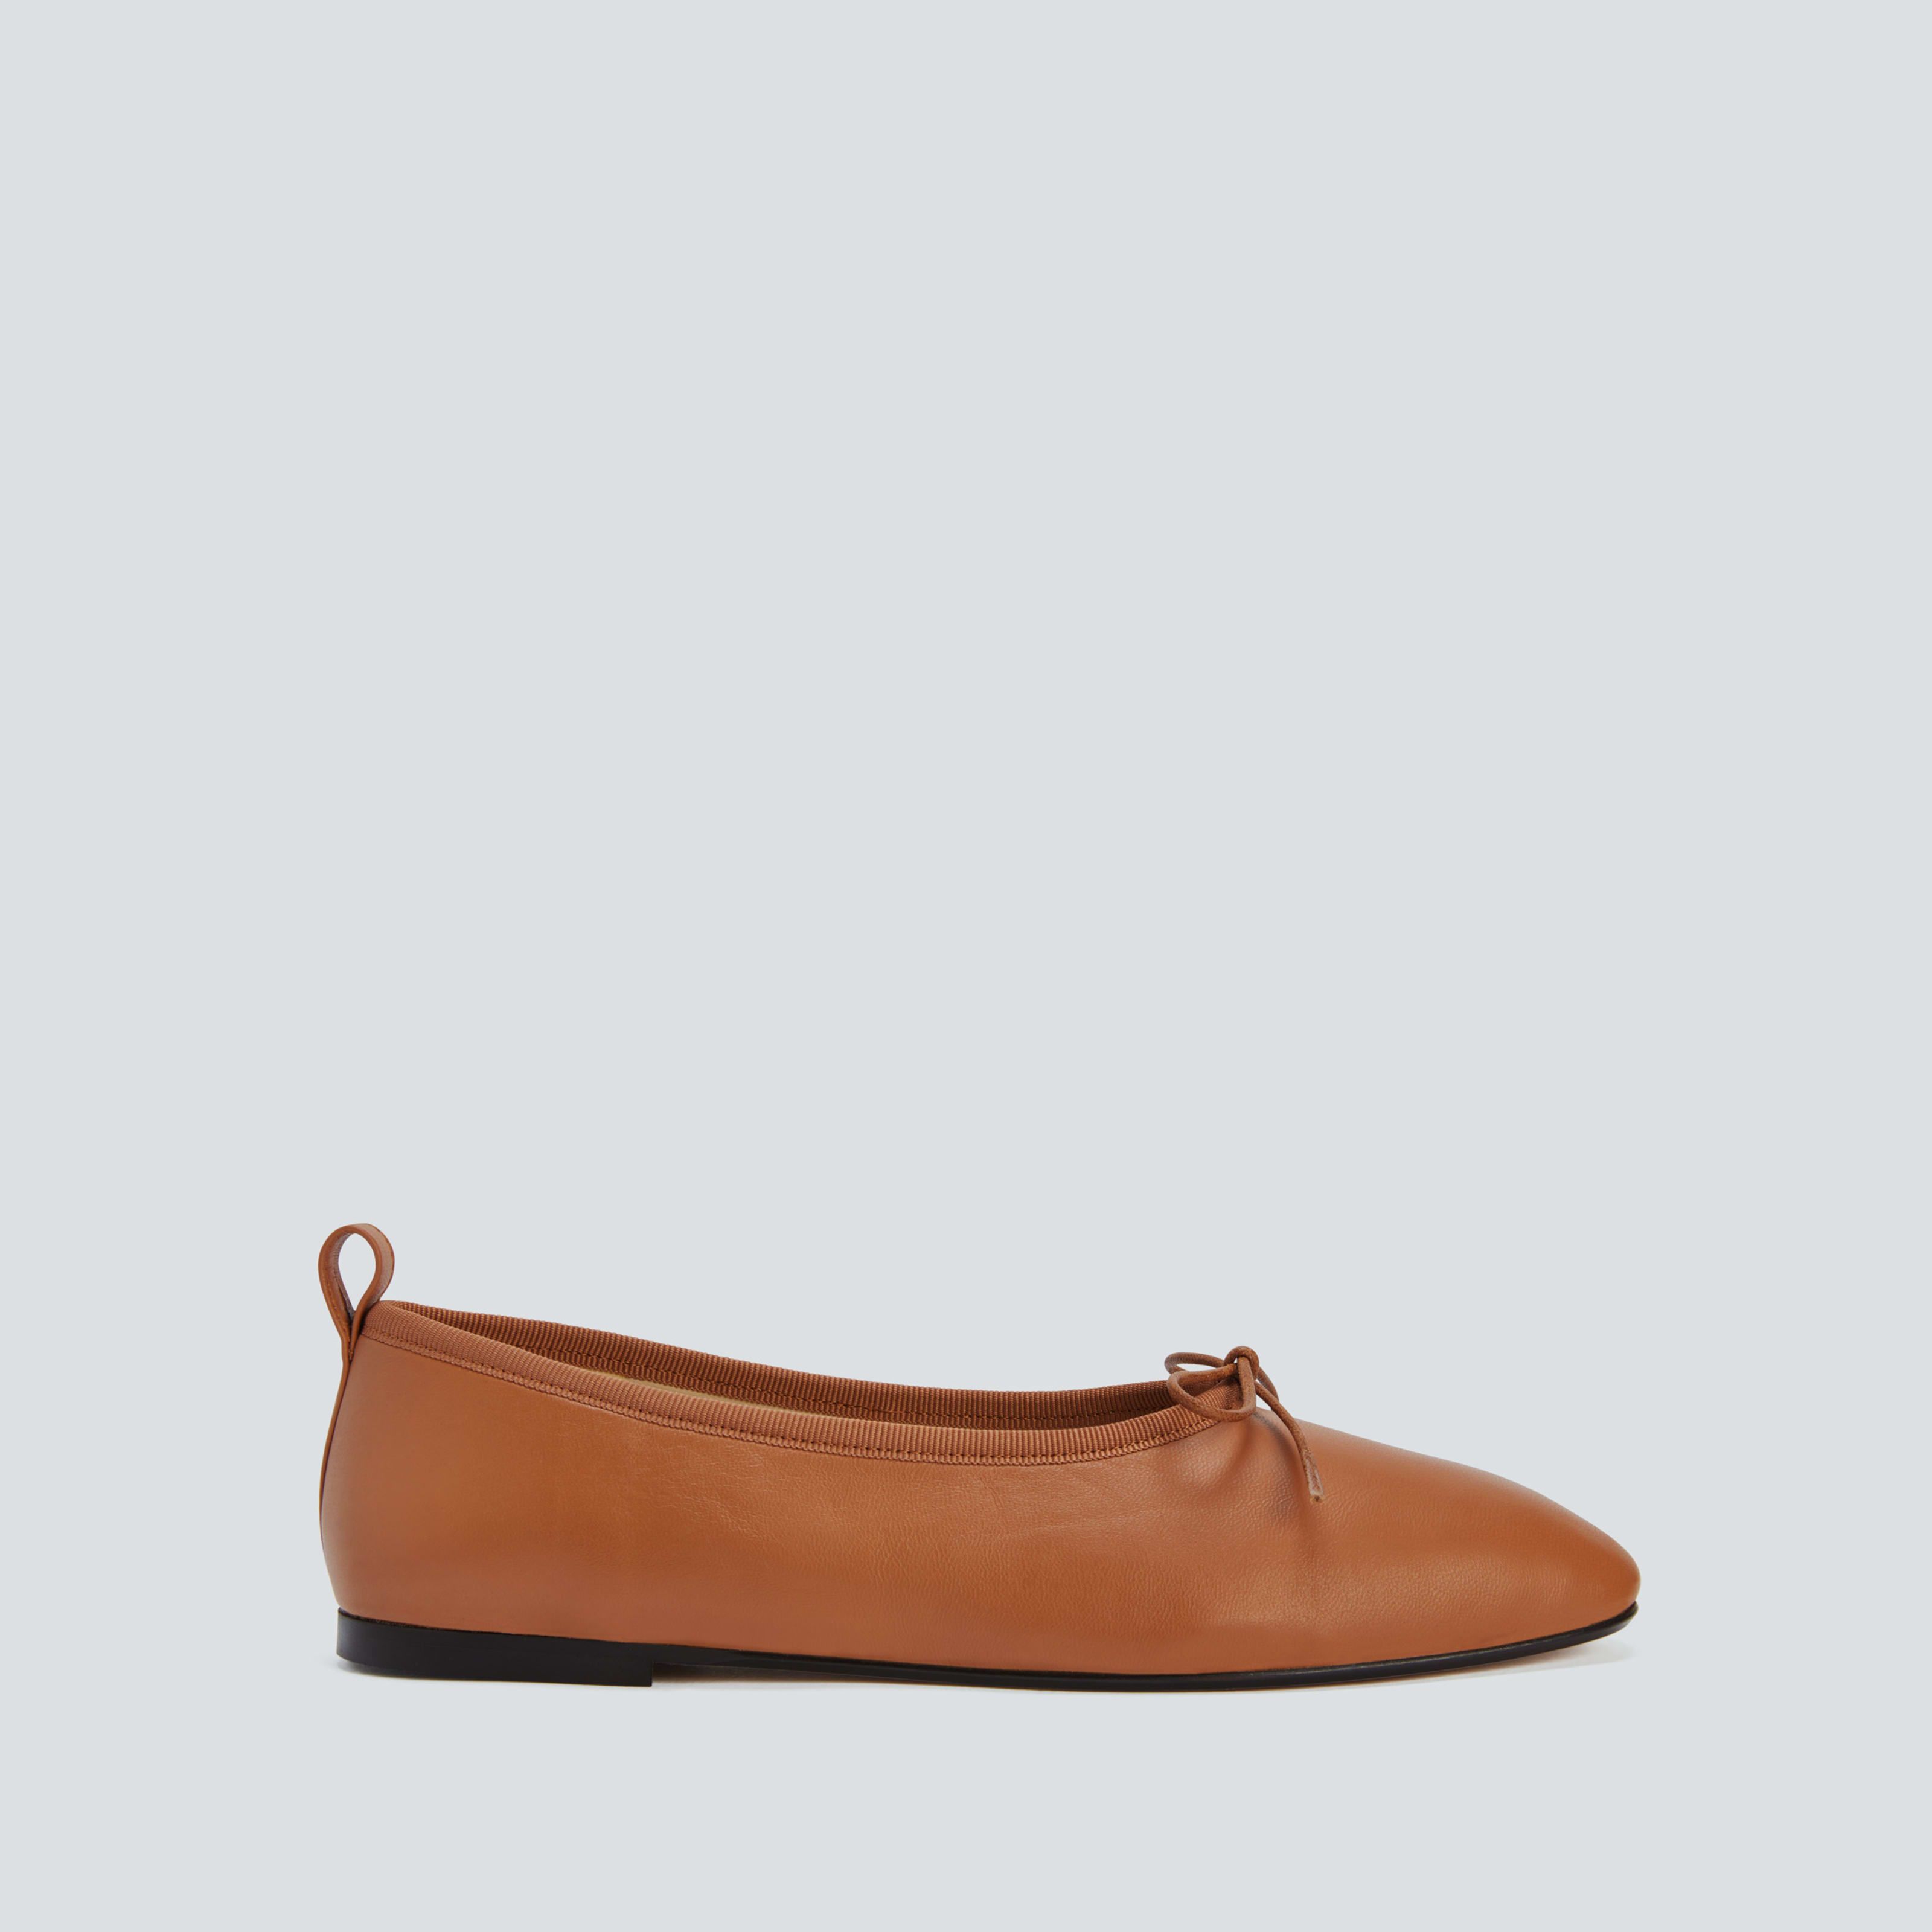 Italian Leather Day Ballet Flat by Everlane in Sugar Almond, Size 6 | Everlane